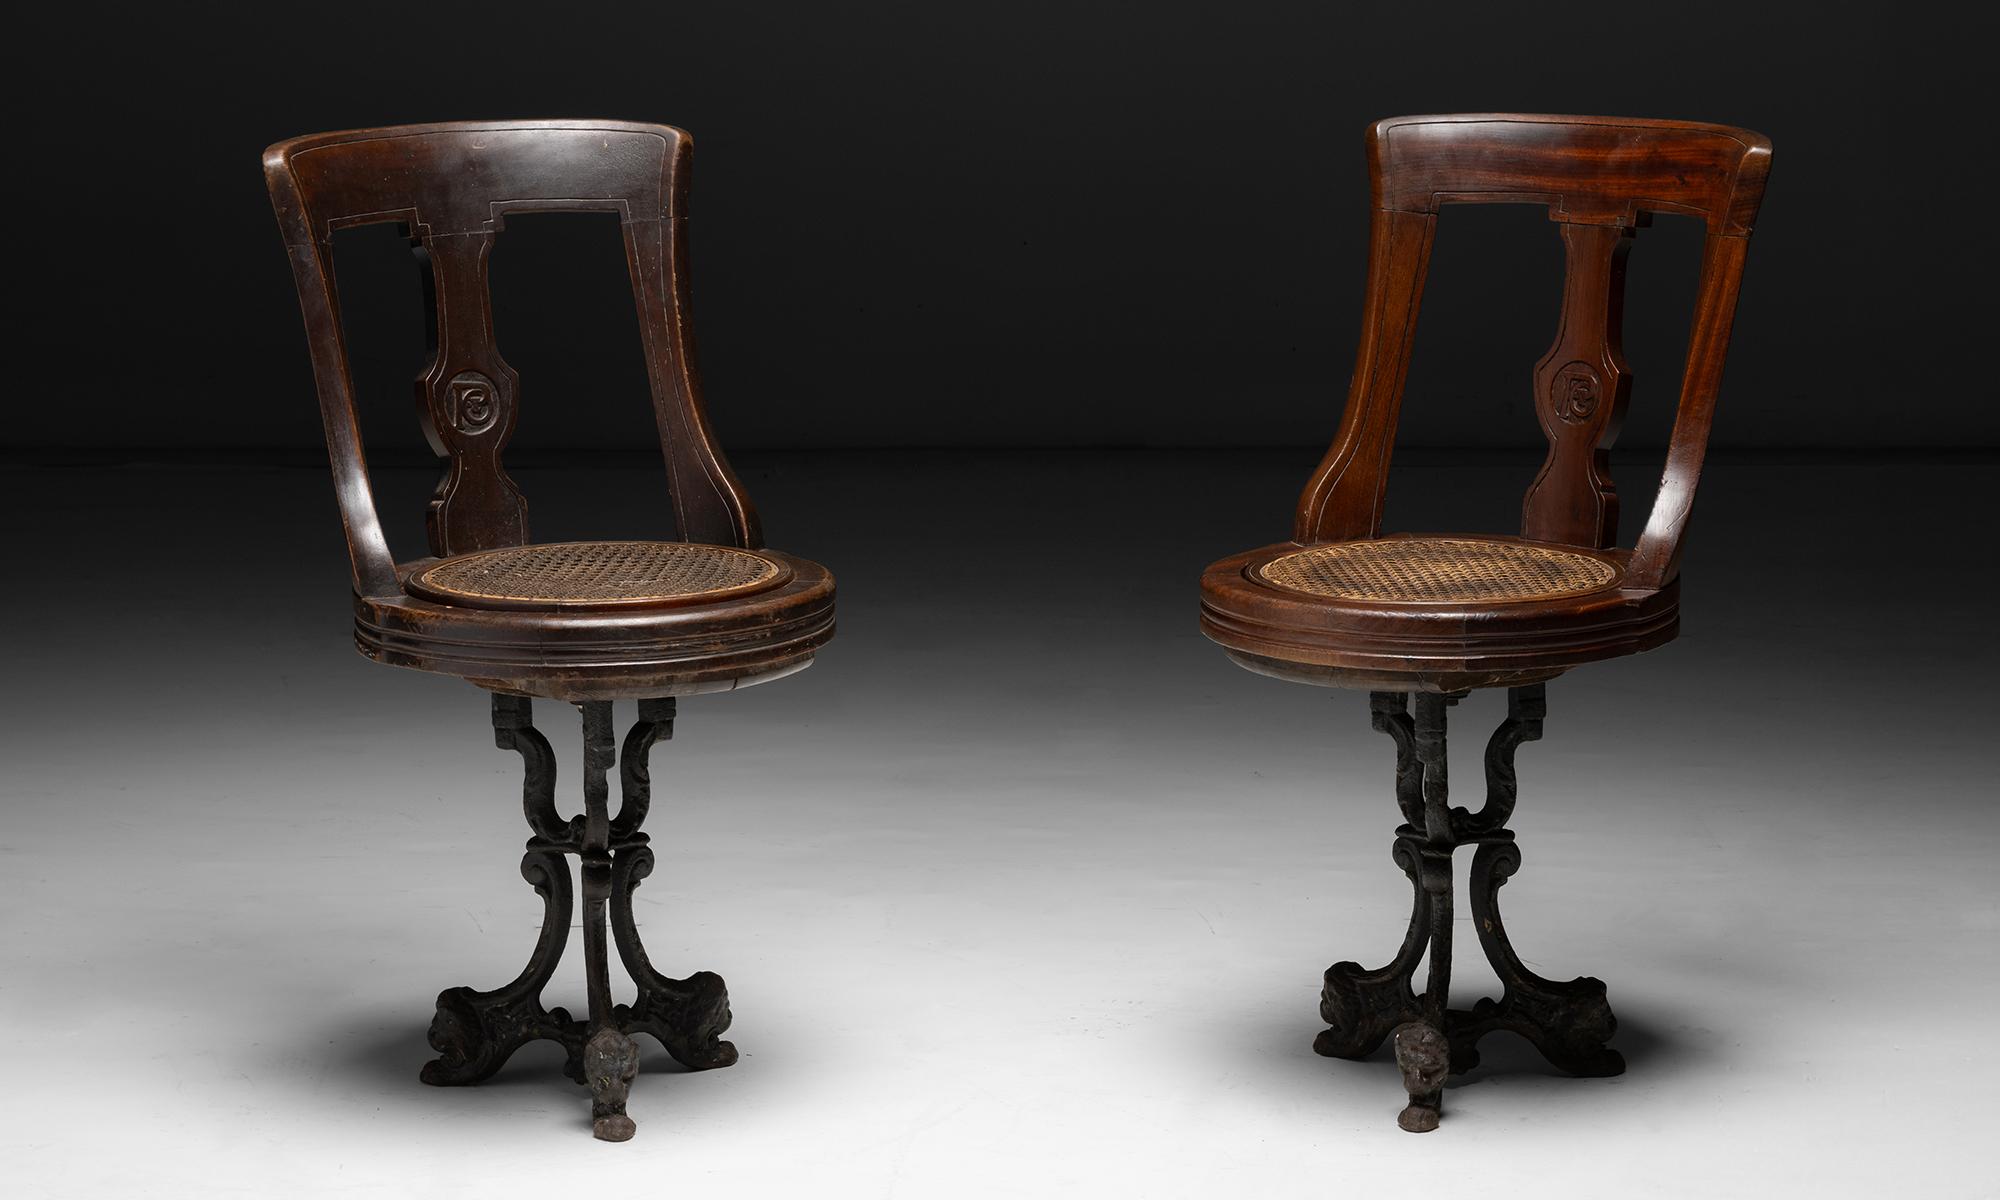 Revolving Ship Chair(s)

England circa 1870

Mahogany seats on cast iron bases with three decorative lions heads and P+O Motif carved on the back.

18.5”w x 19”d x 35”h x 19”seat